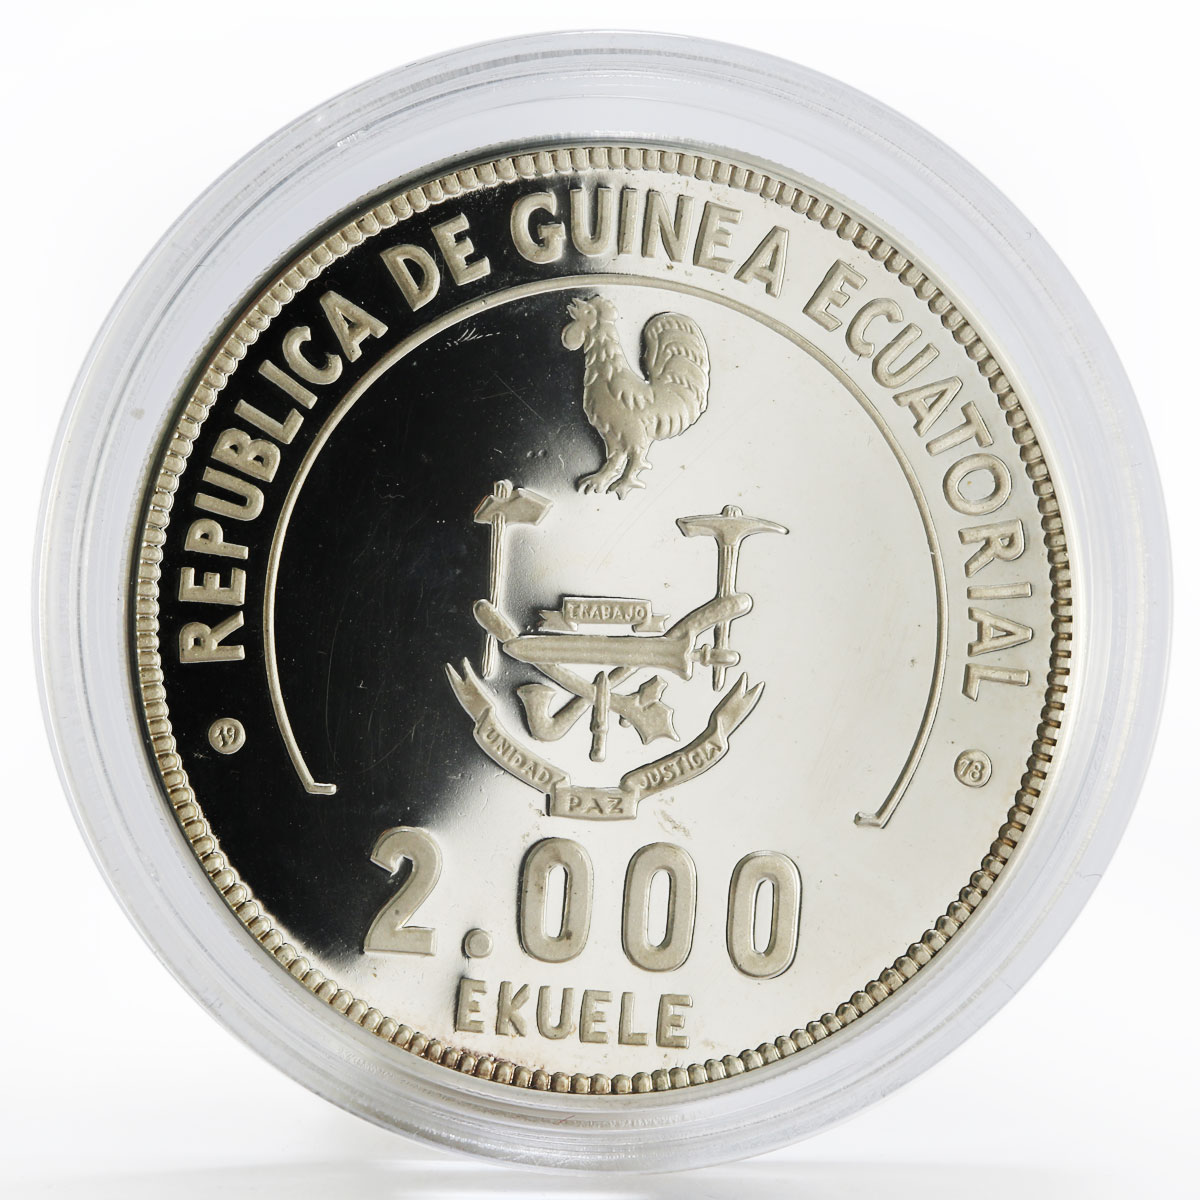 Equatorial Guinea 2000 ekuele FIFA World Cup Argentina proof silver coin 1979